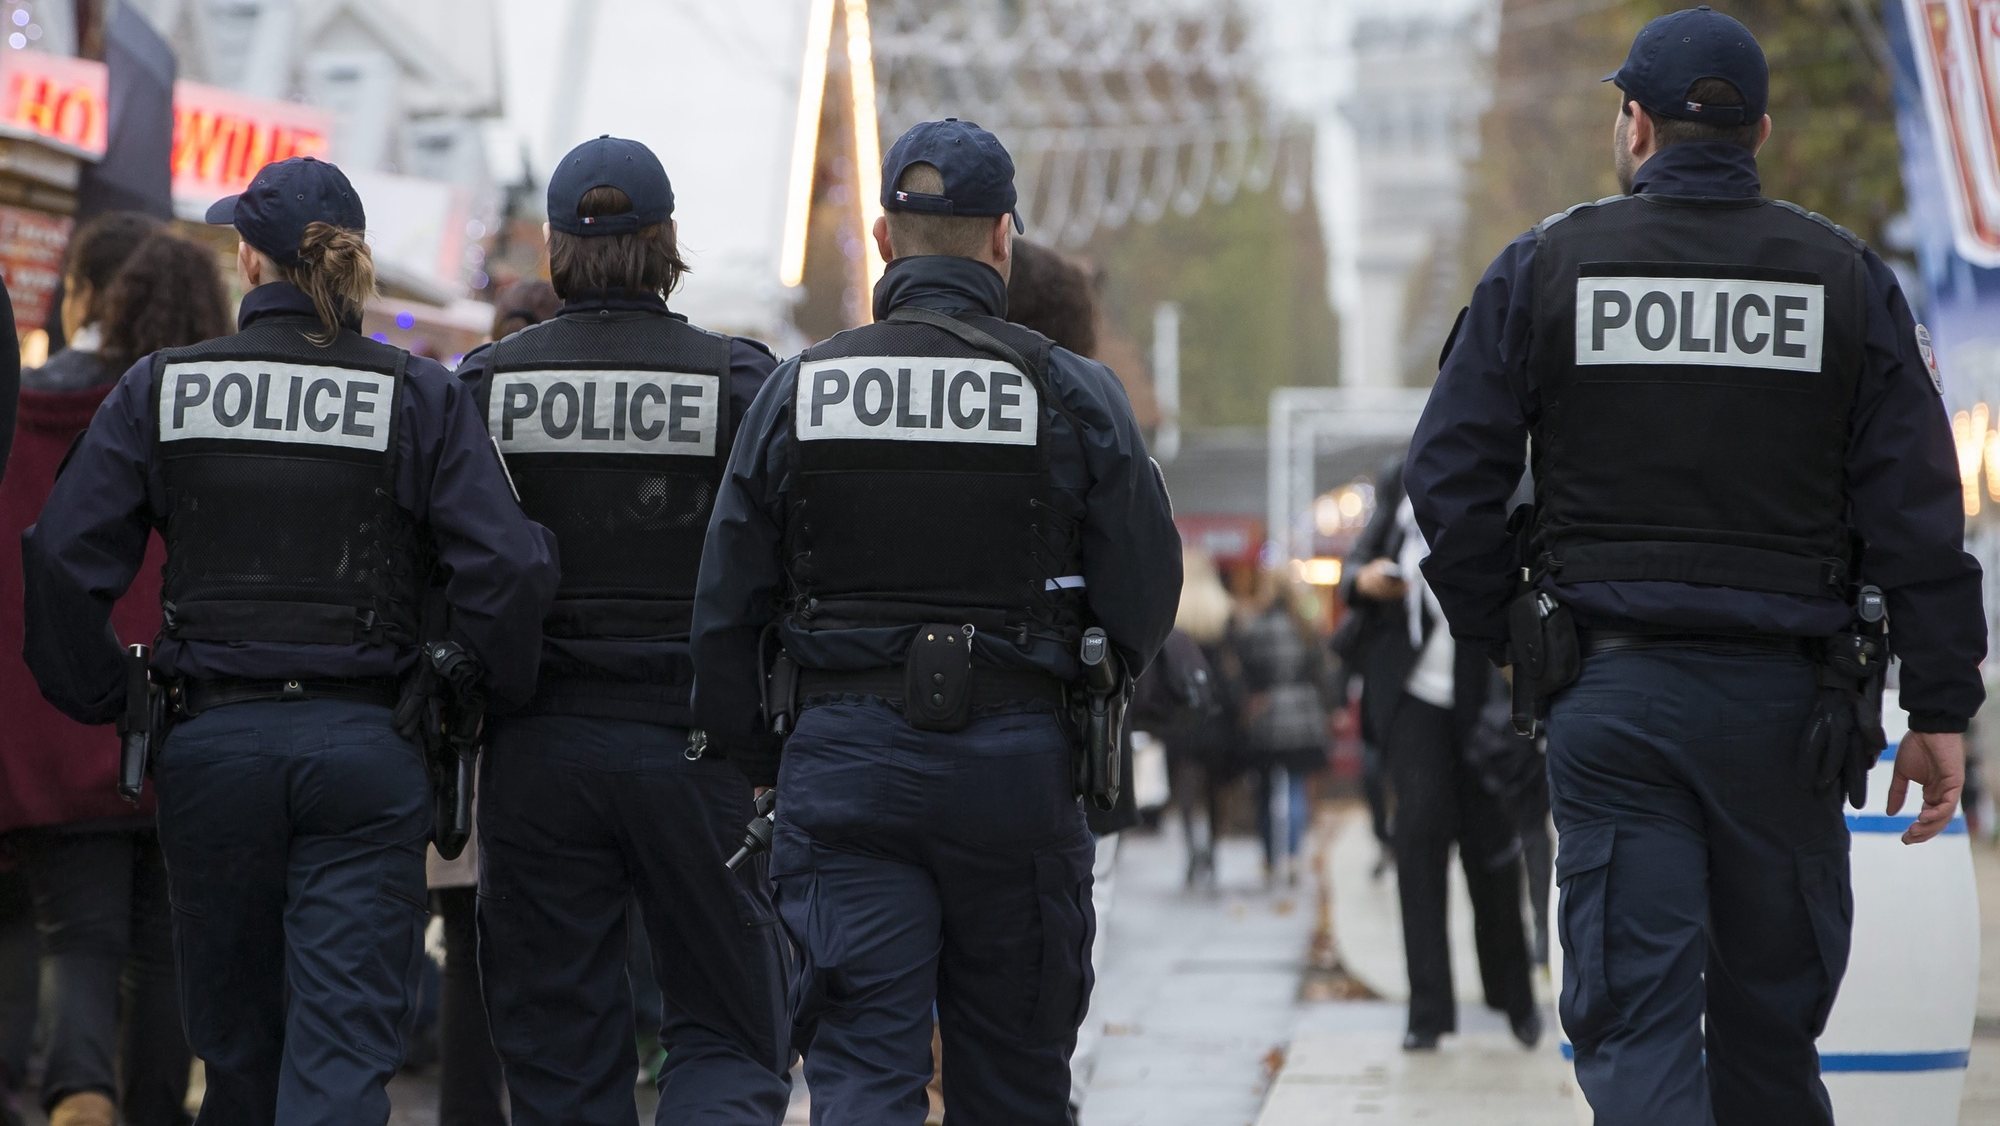 epa05033098 French police officers patrol the outdoor Christmas market on the renowned Avenue des Champs-Elysees in Paris, as part of the state-of-emergency and heightened security measures in Paris following the 13 November attacks, in Paris, France, 19 November 2015. Paris suffered terrorist attacks at the hands of the so-called Islamic State on November 13, when Islamist suicide bombers and gunmen claimed the lives of 129 people, and injured 352.  EPA/IAN LANGSDON